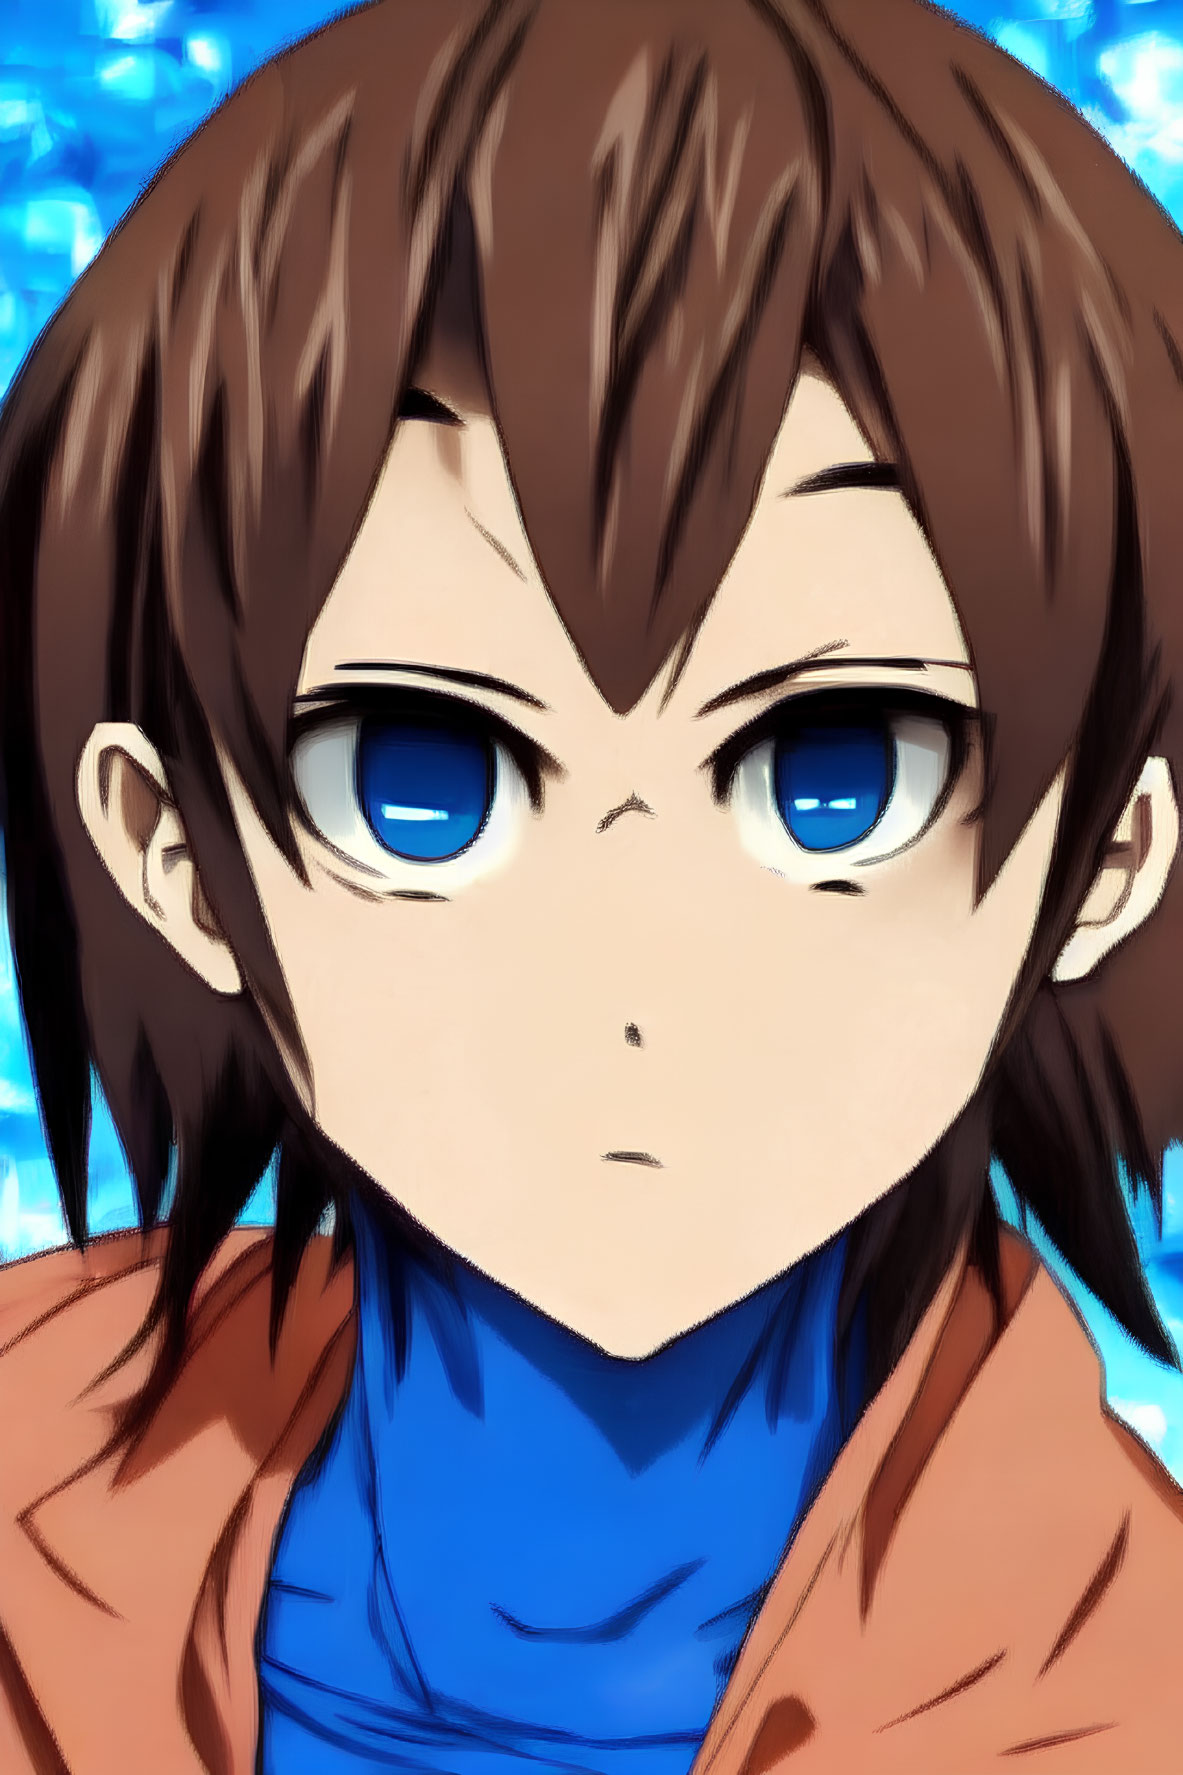 Anime character with short brown hair and large blue eyes in blue shirt and orange jacket on blue background.